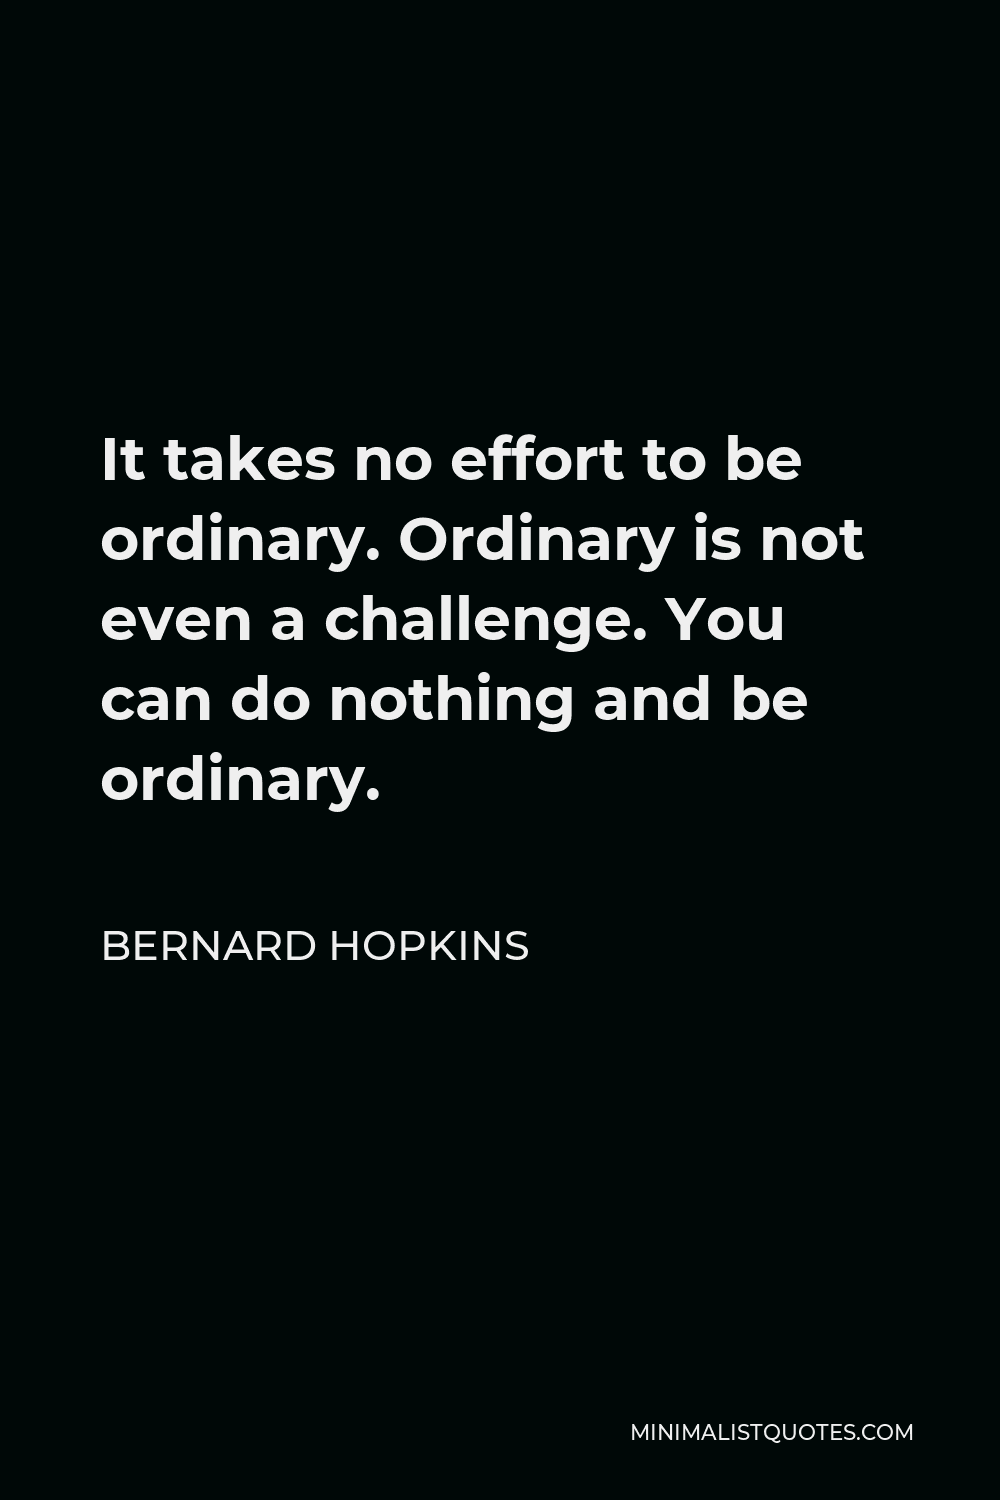 Bernard Hopkins Quote - It takes no effort to be ordinary. Ordinary is not even a challenge. You can do nothing and be ordinary.